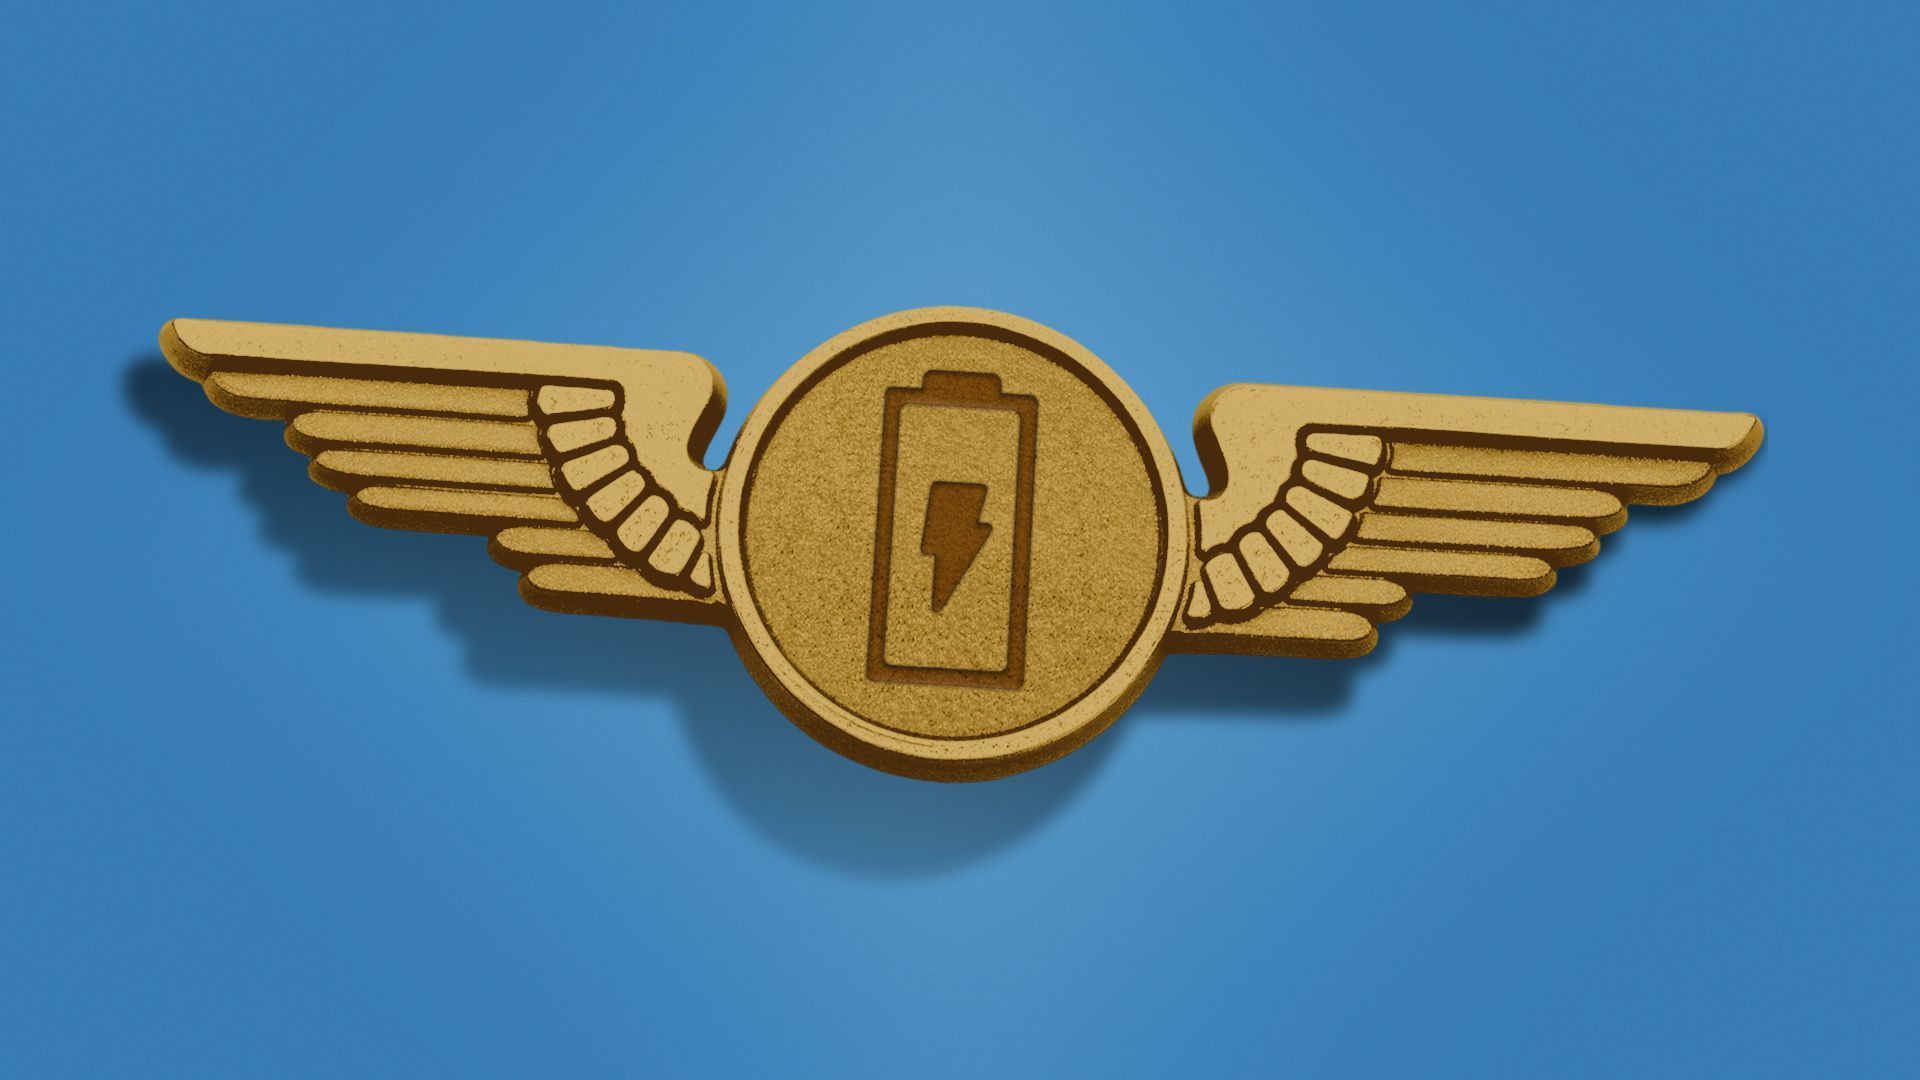 An aviation symbol with a battery in it